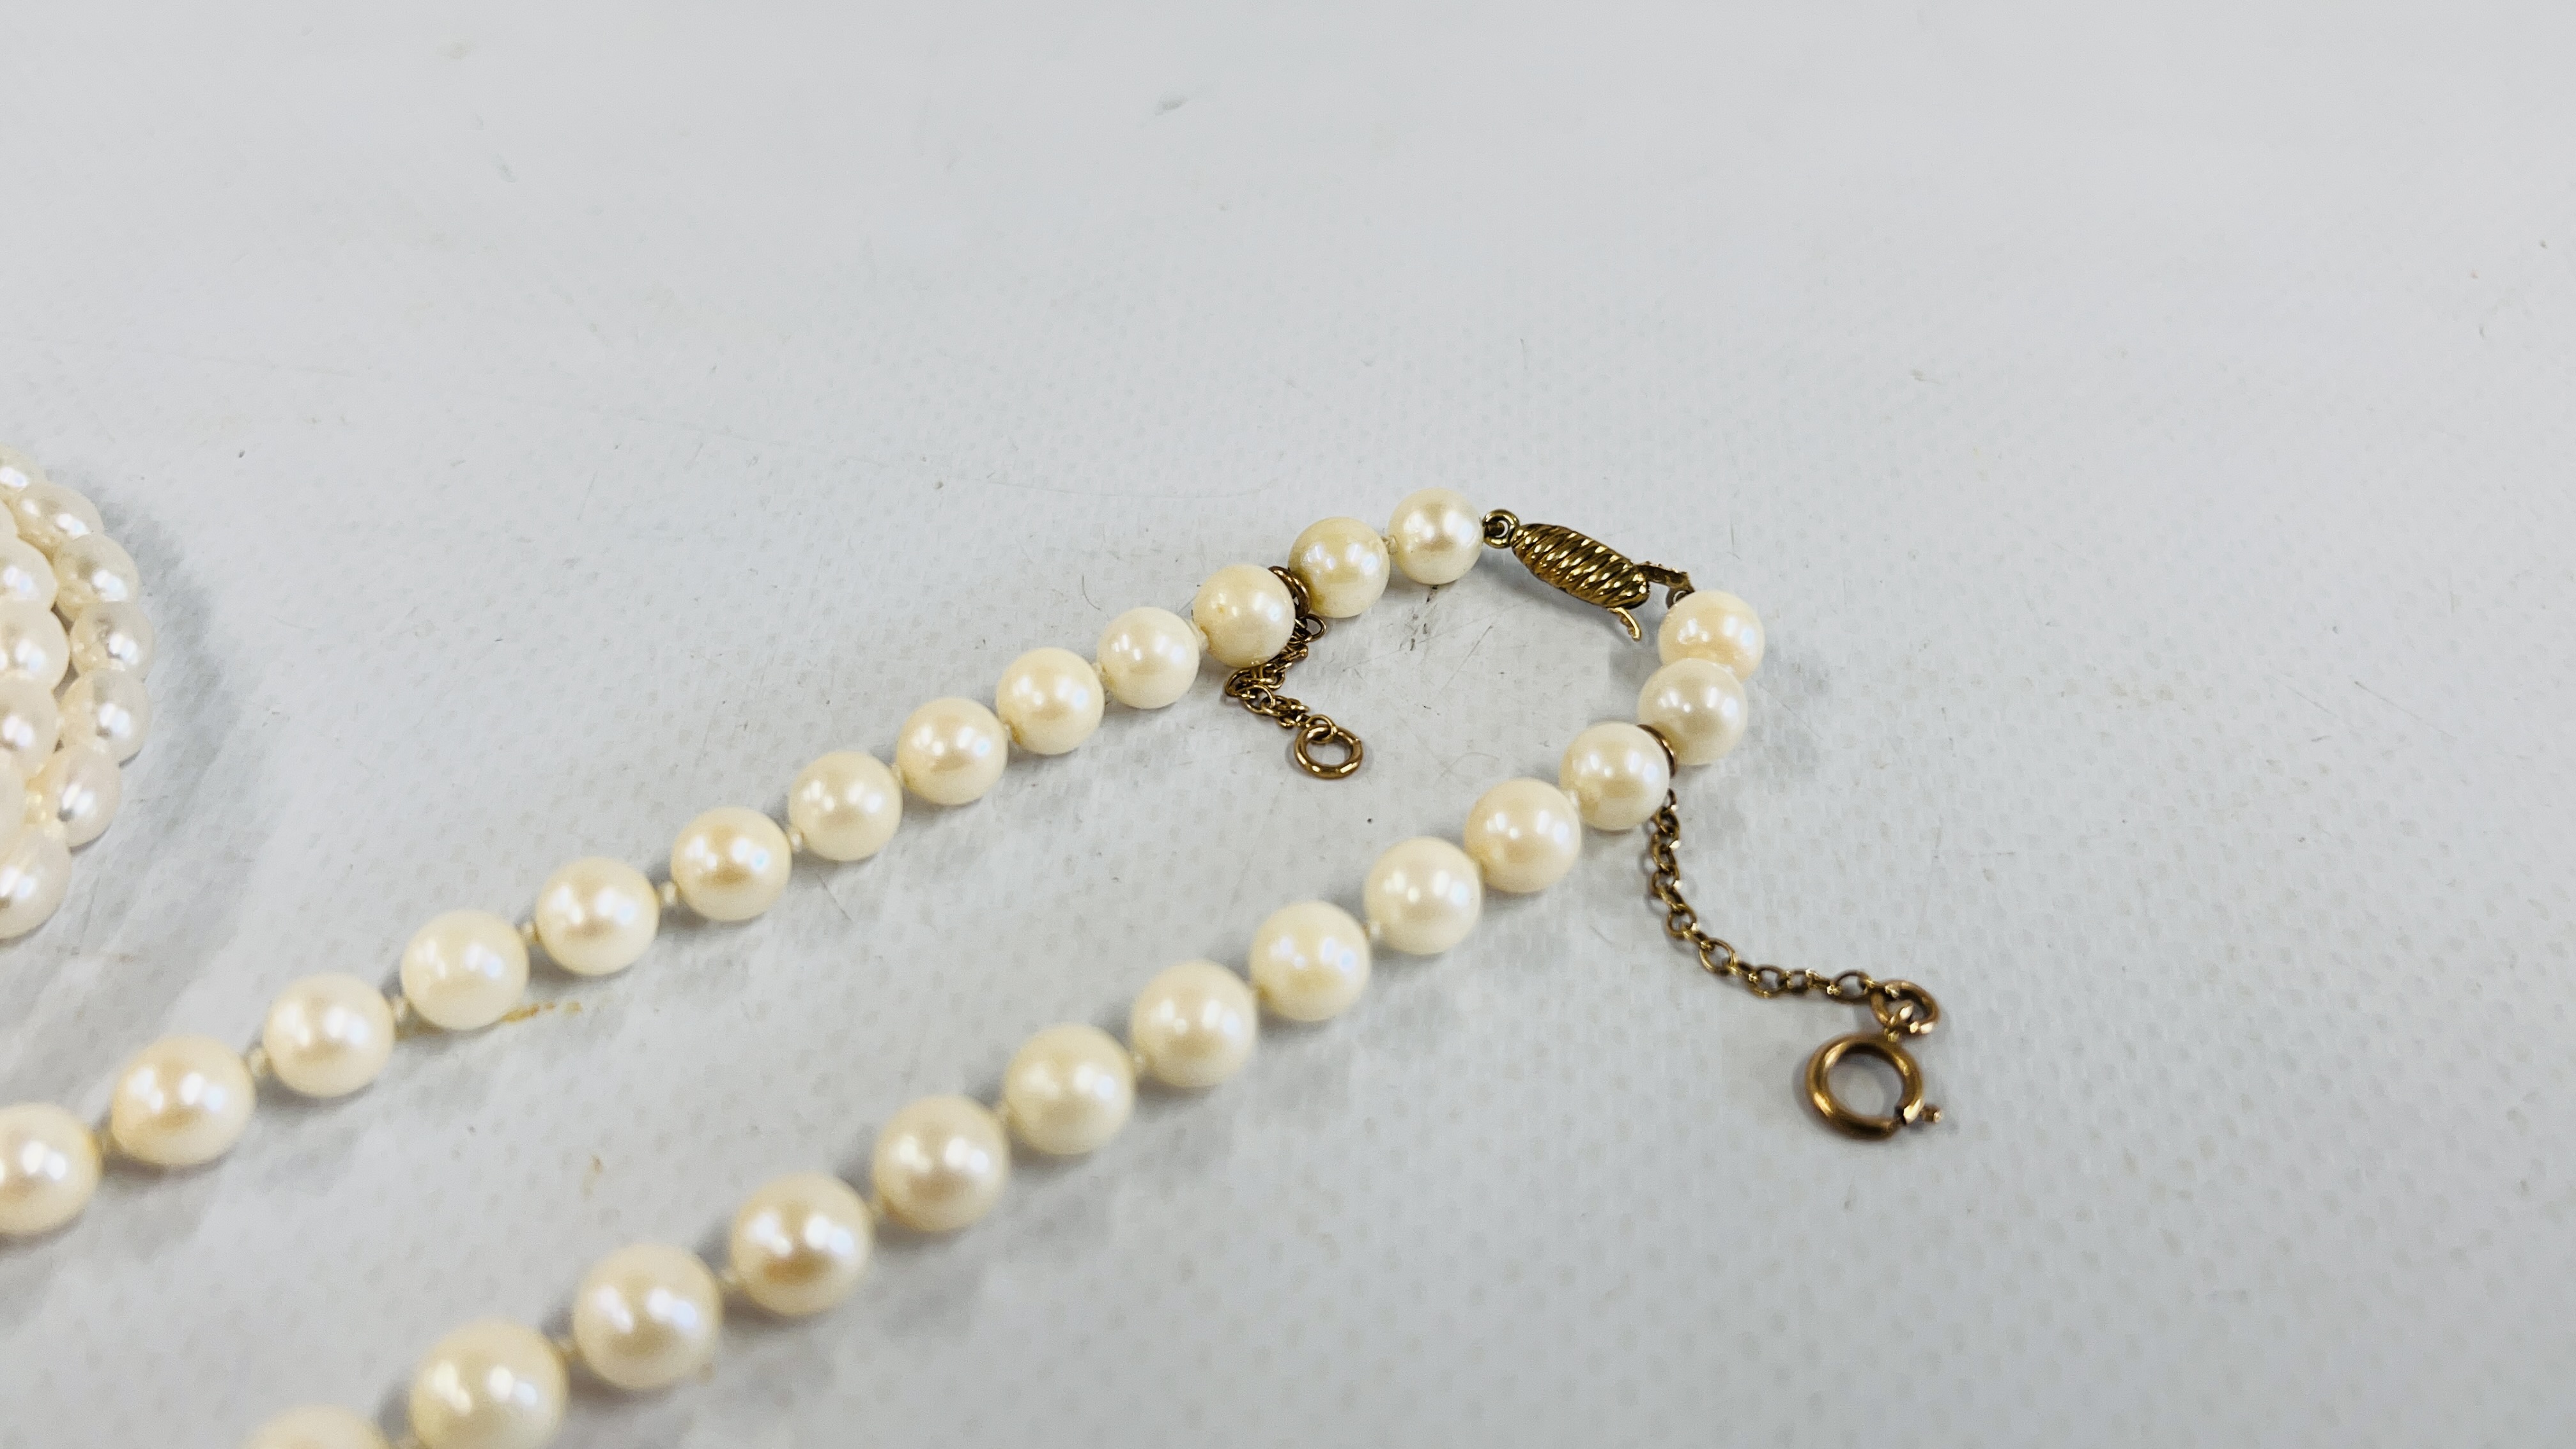 A PEARL STRAND NECKLACE WITH A 9CT GOLD CLASP AND SAFETY CHAIN AlONG WITH A PEARL BRACELET. - Image 3 of 5